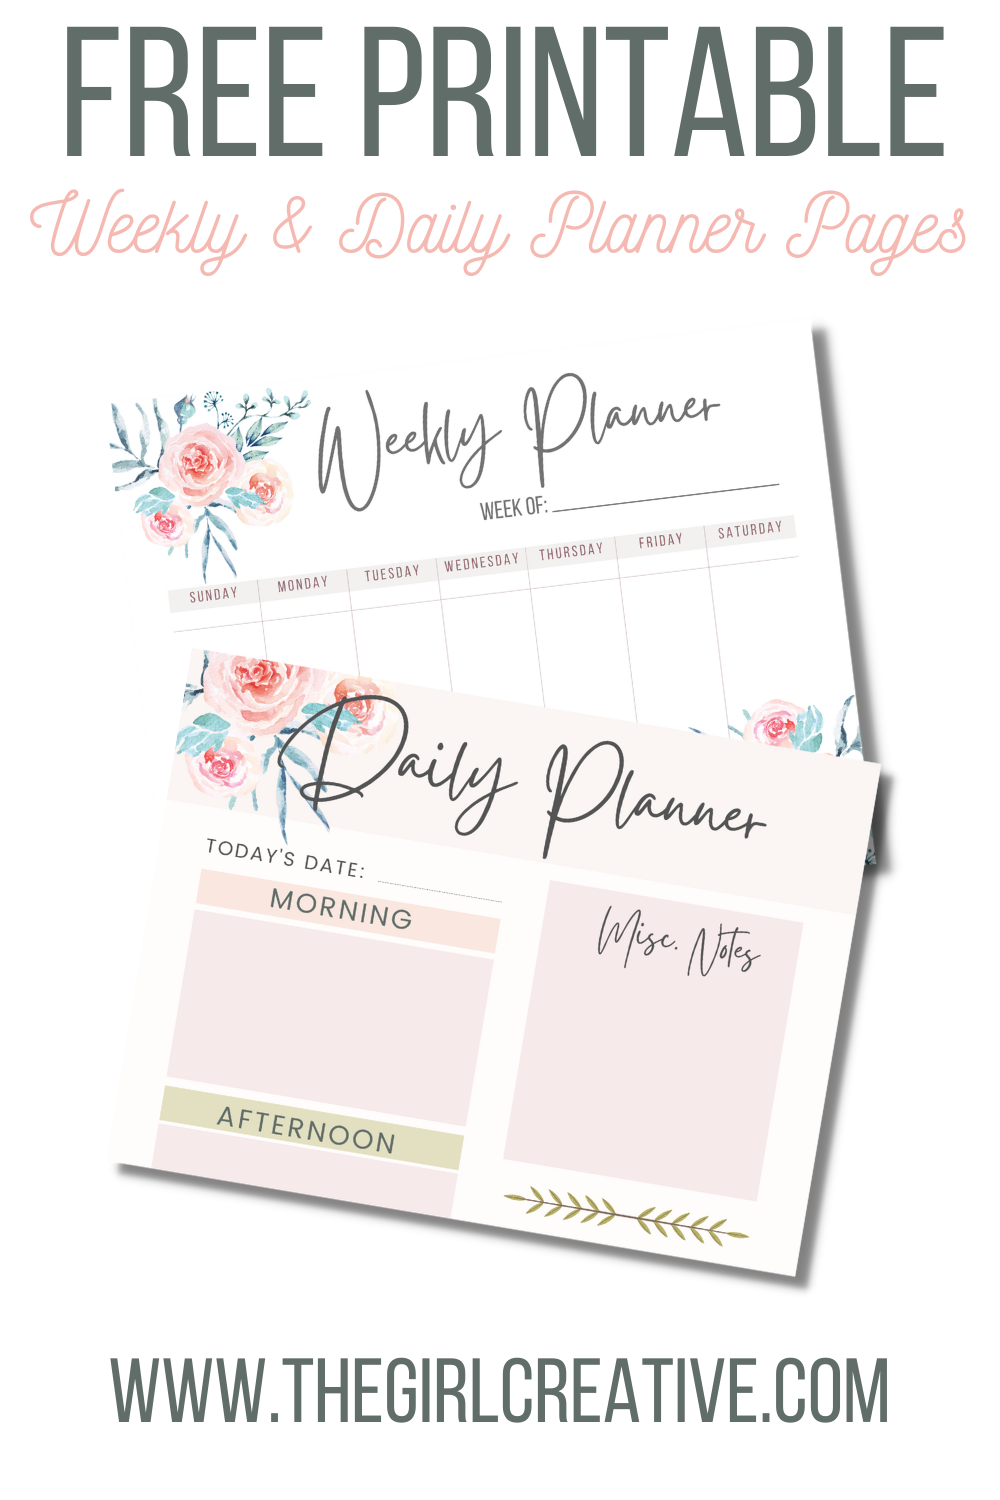 Daily and Weekly Planner Pages